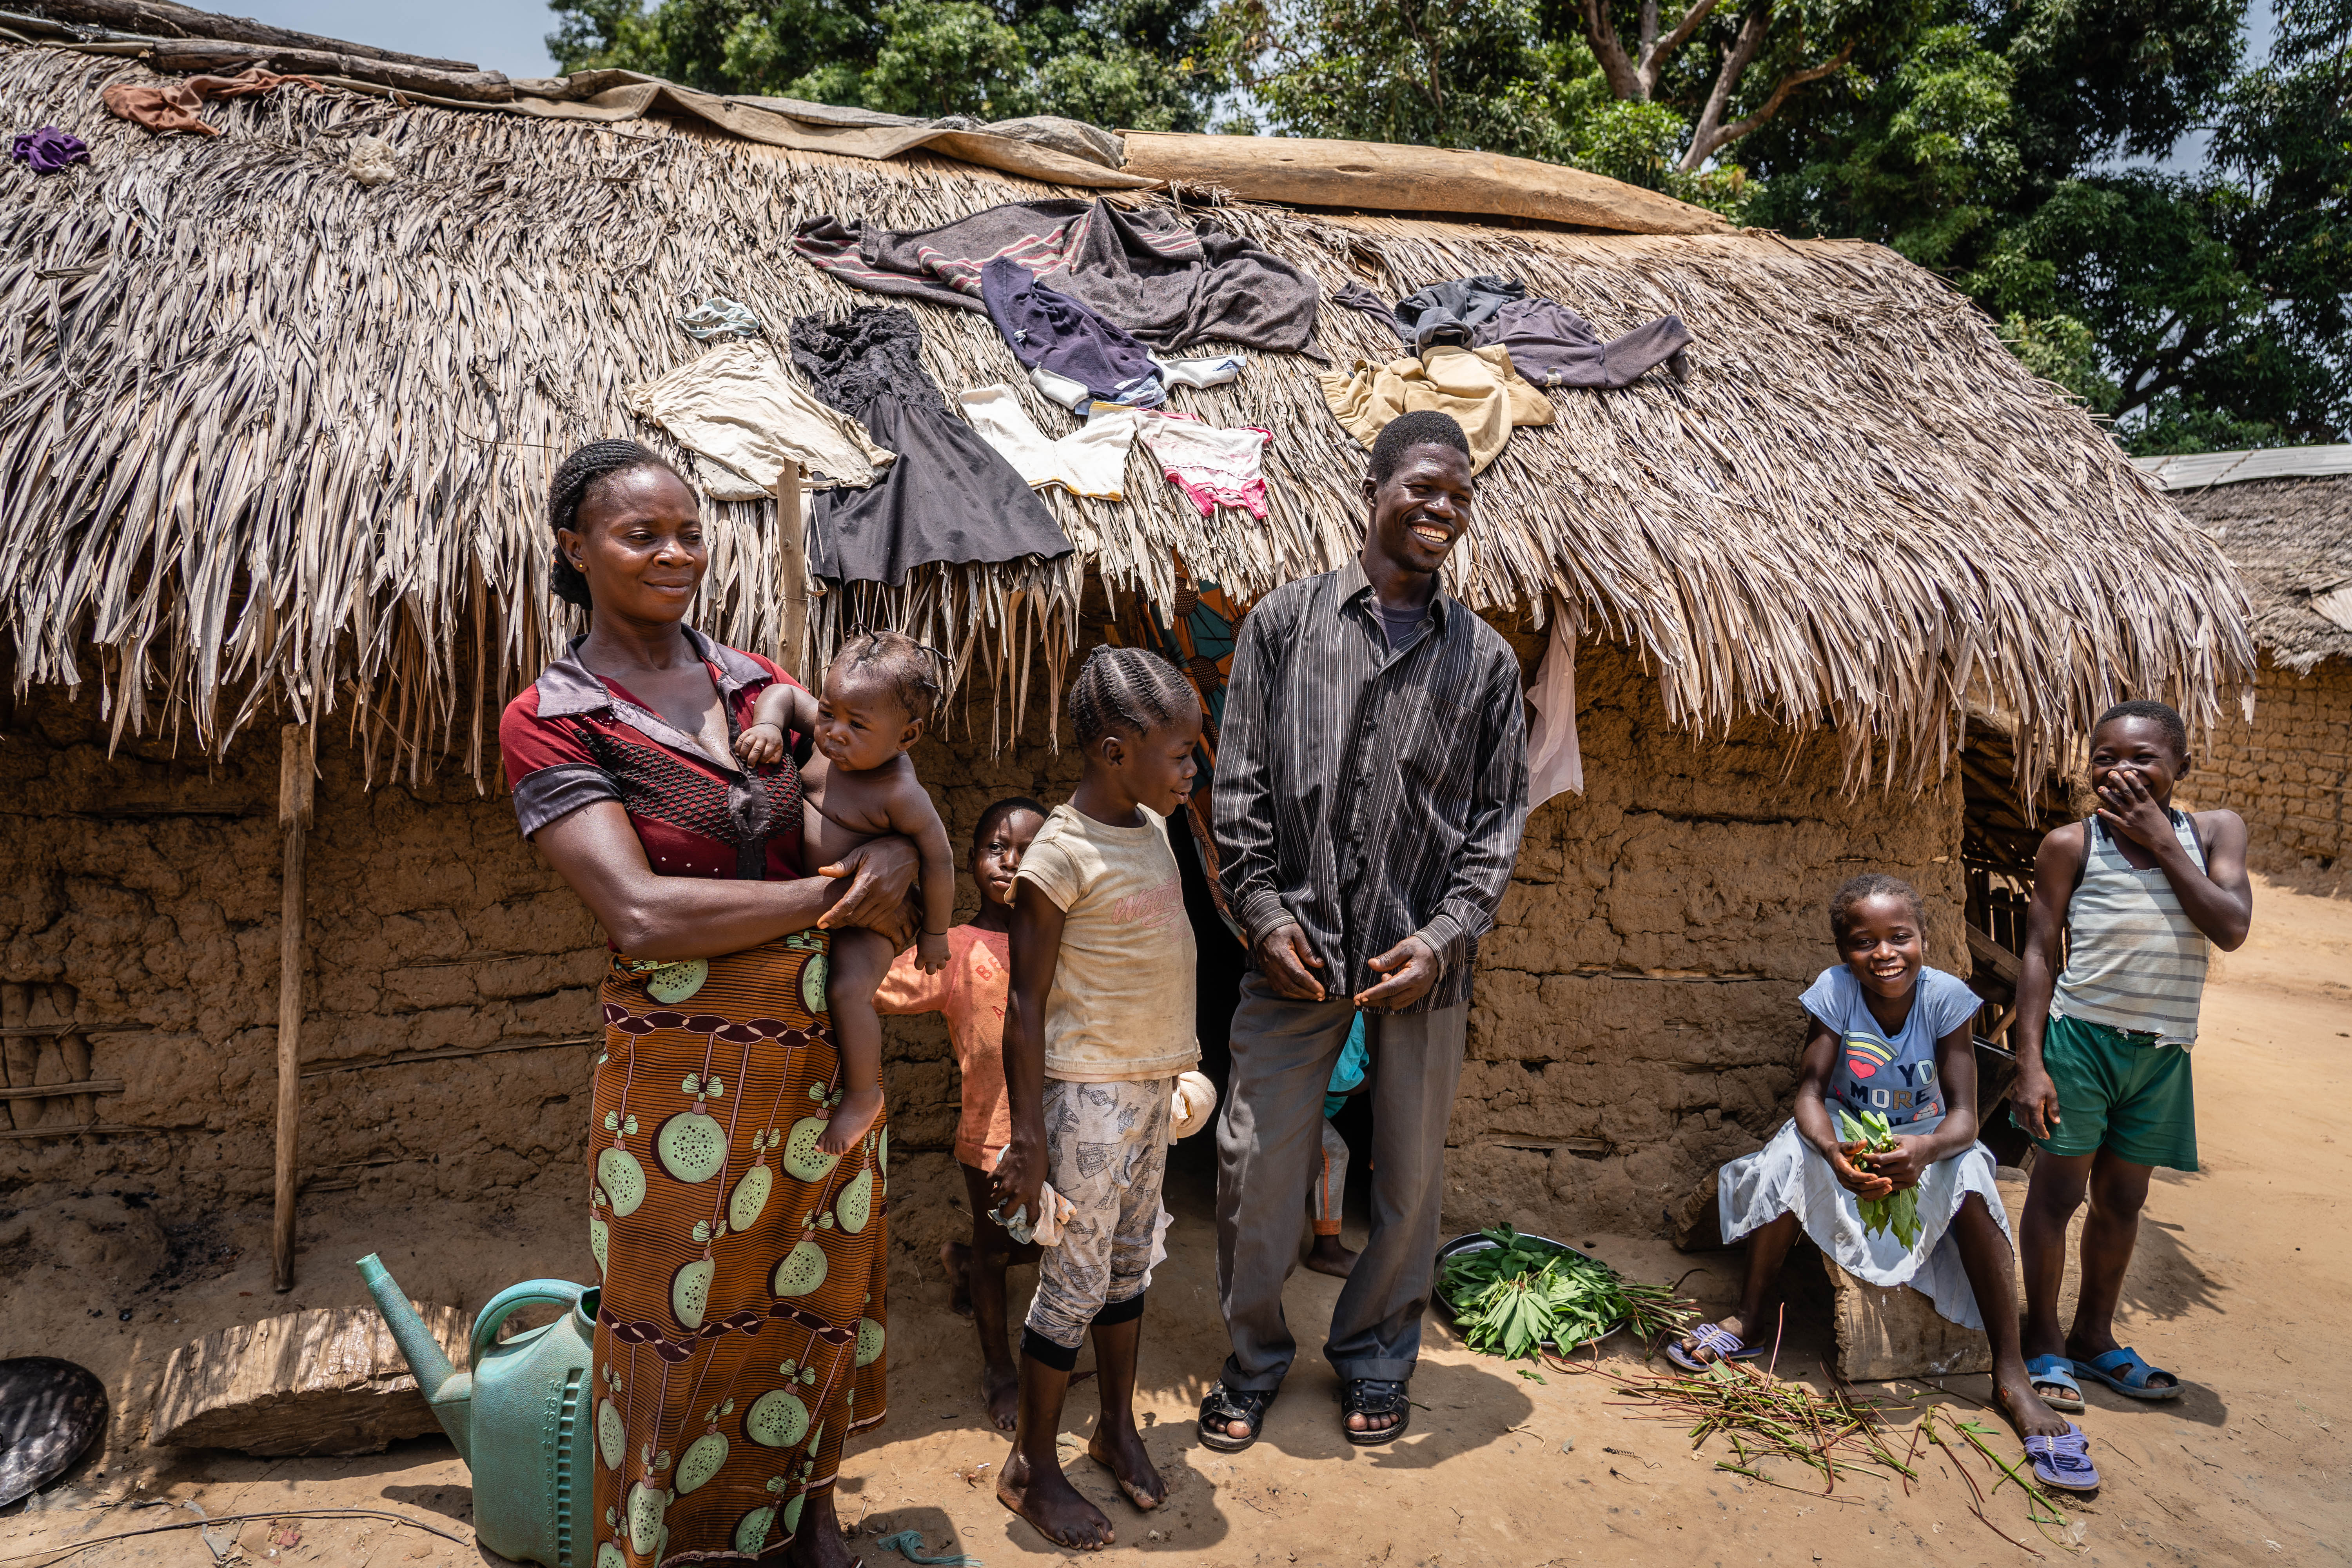 Romanie lives with her parents and siblings in Satema DRC, where she has lived nearly 4 years since they fled conflict in Central African Republic.